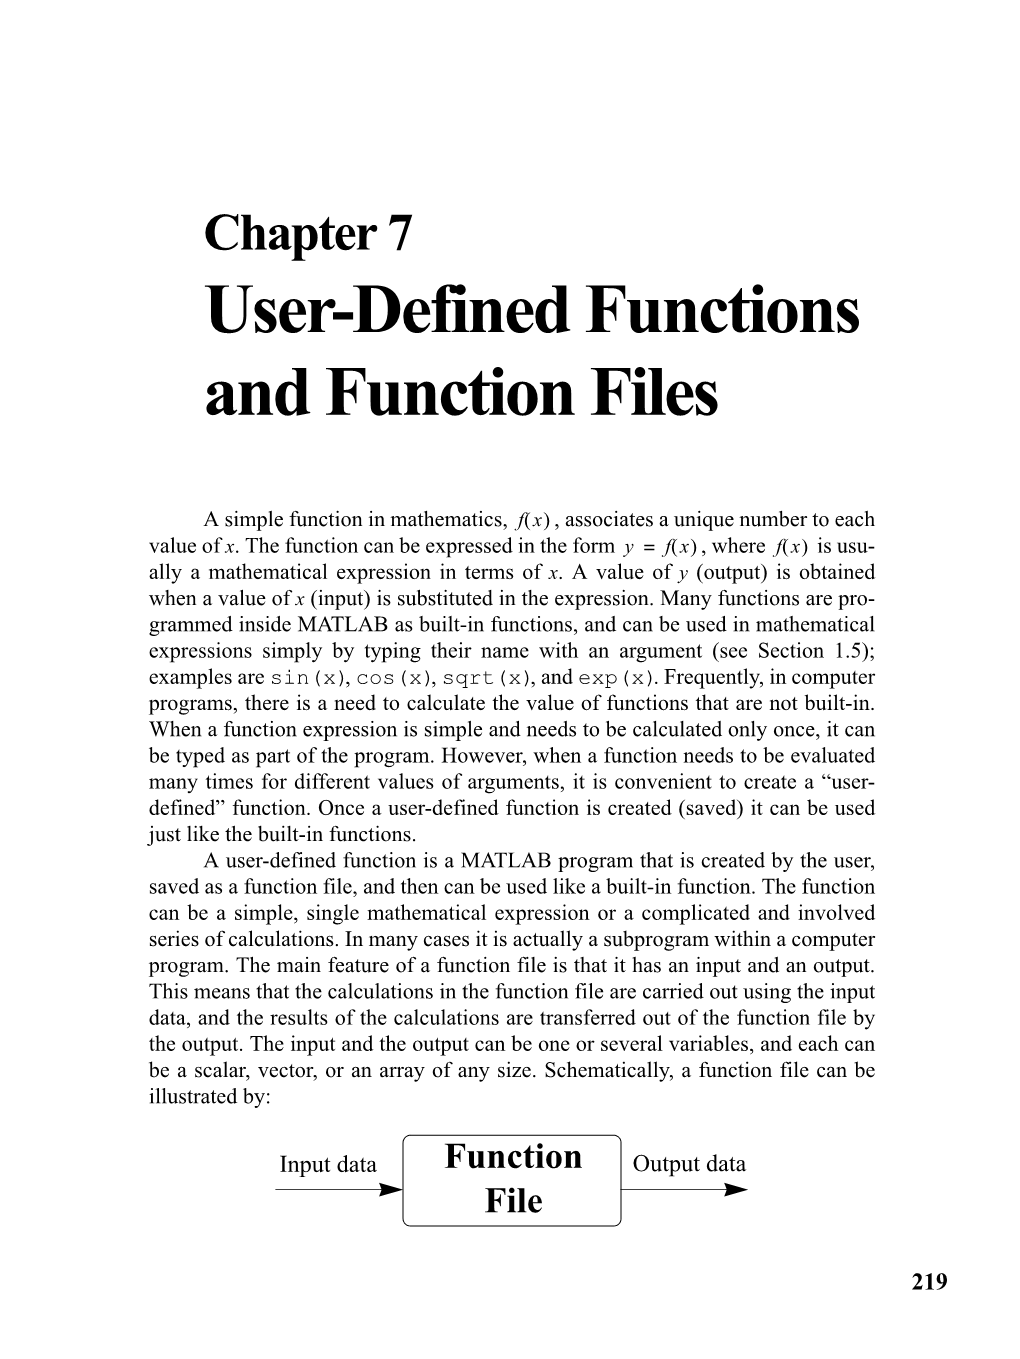 Chapter 7 User-Defined Functions and Function Files